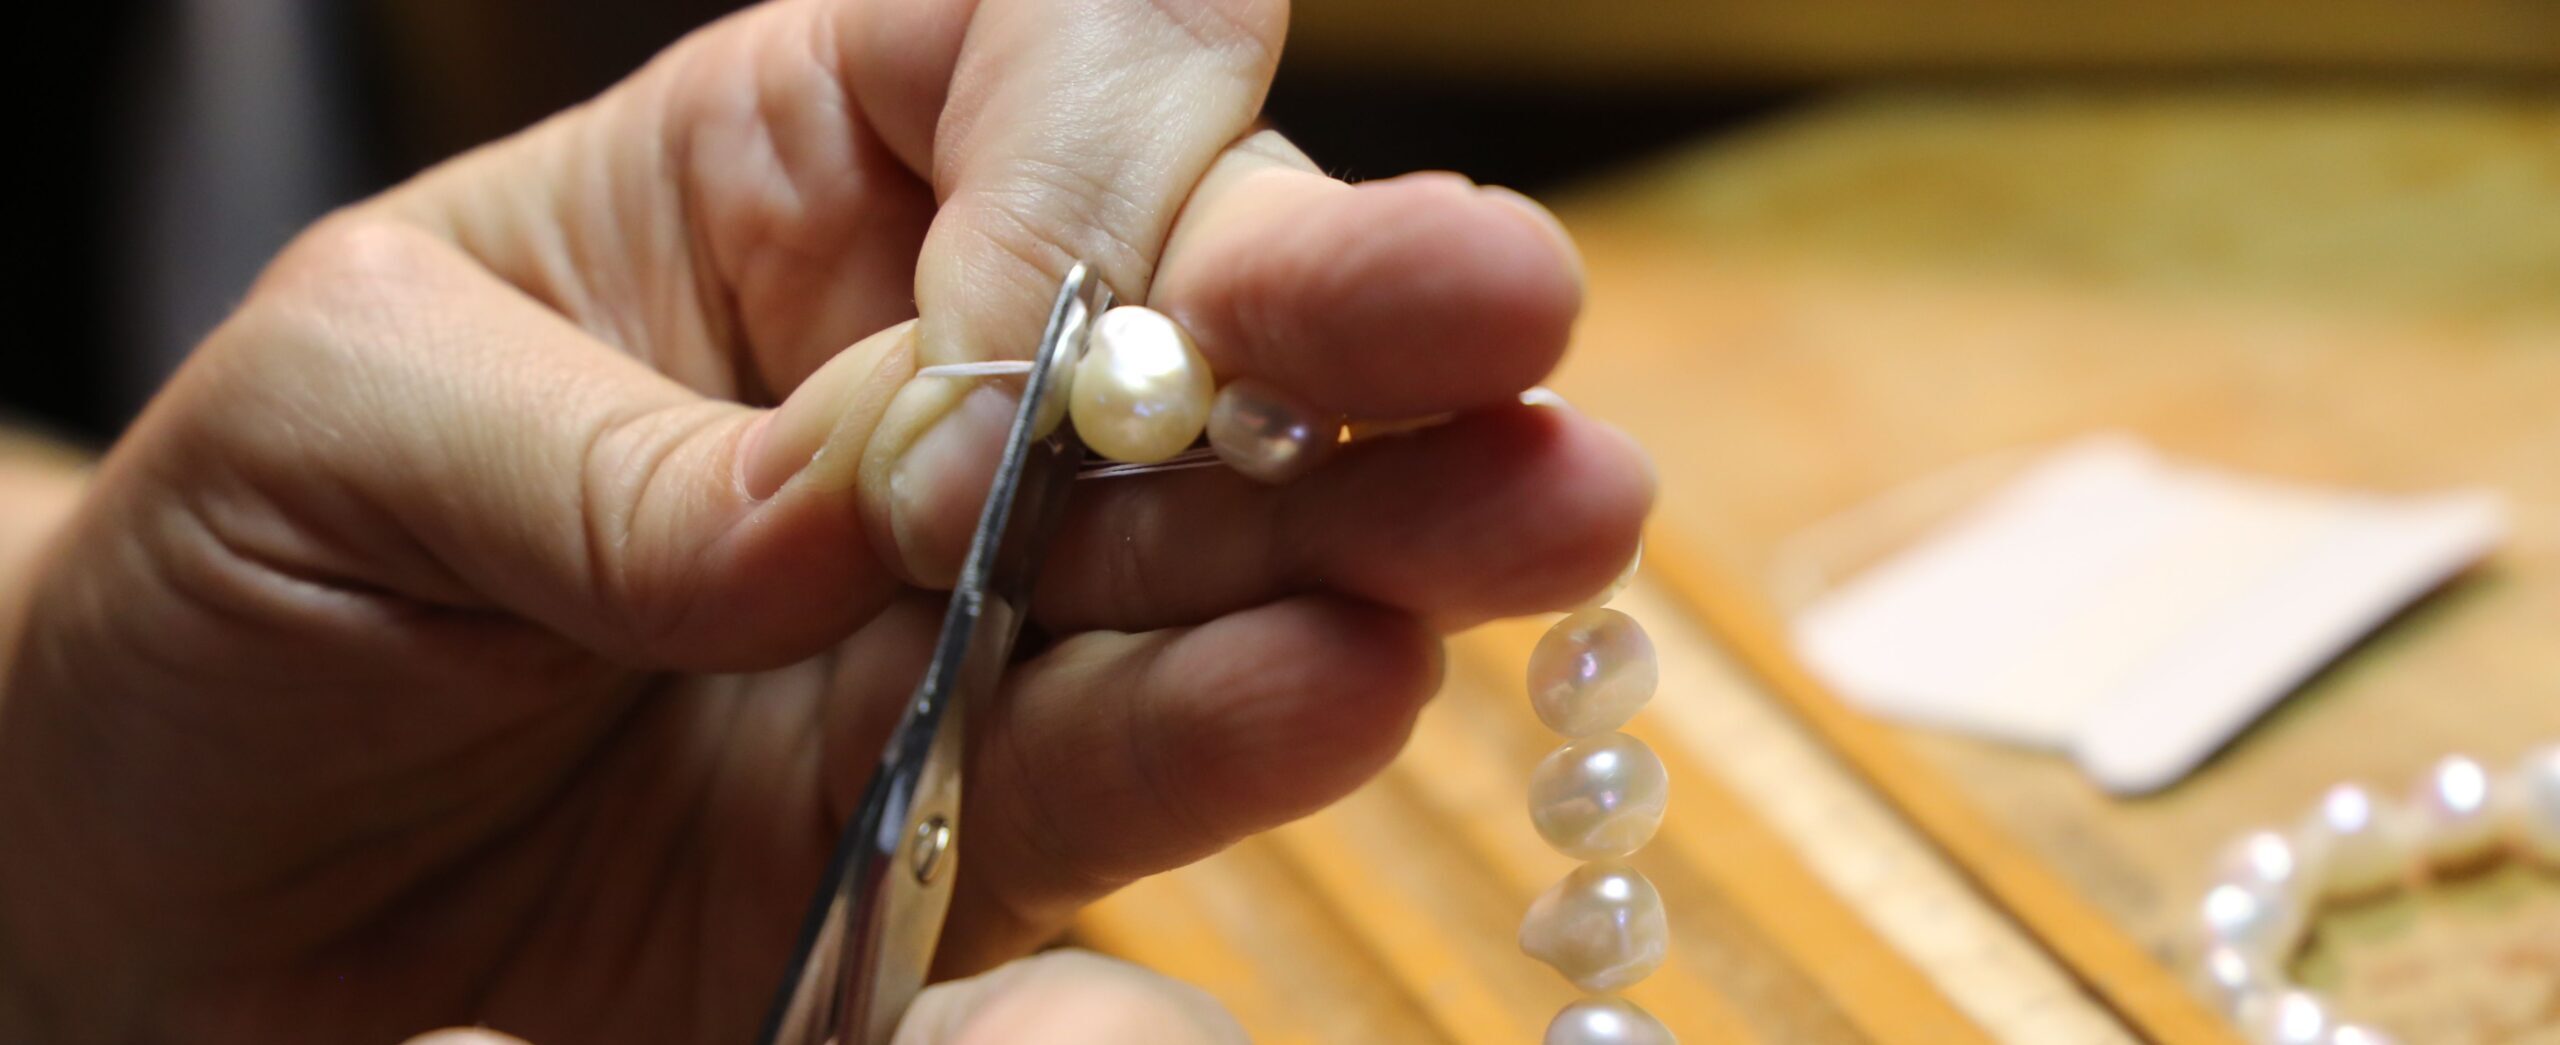 Pearl jewellery threading and hanging at BAJ